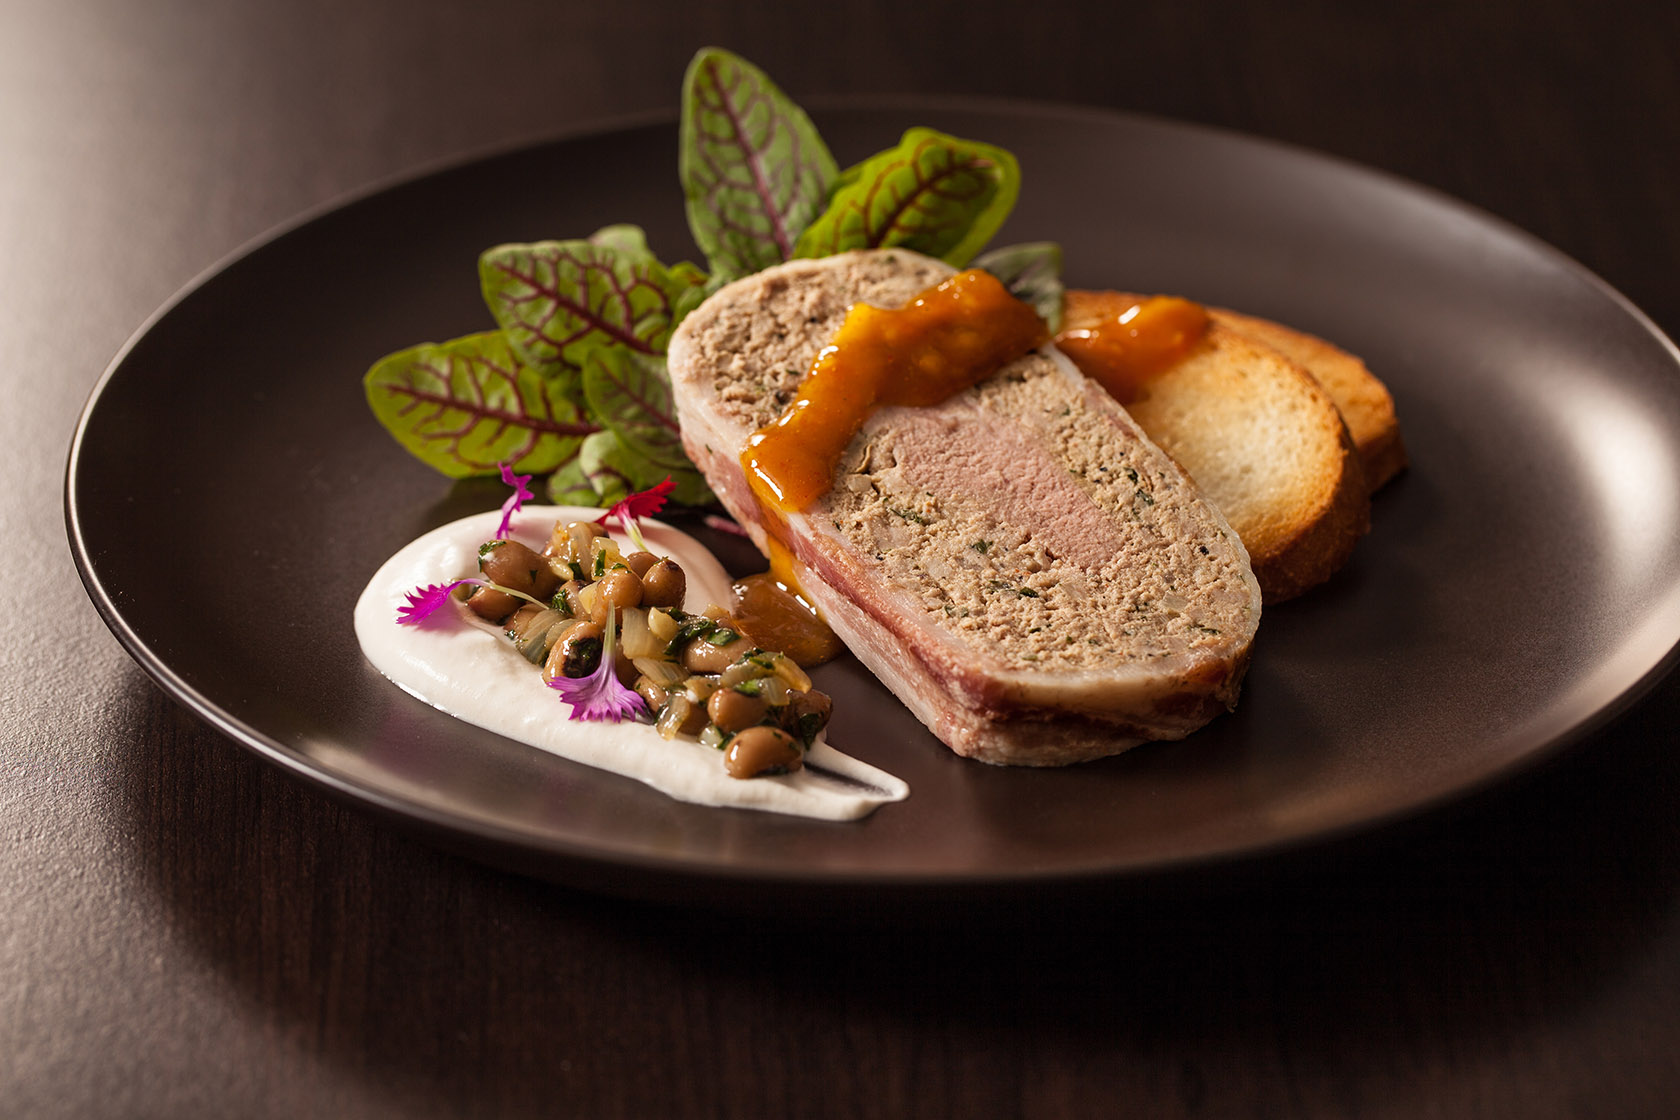 New Year's Duck Terrine by Sandi Sheppard, Norman, OK, was awarded 2nd Runner Up in the 2017 Strut Your Duck Recipe Contest.